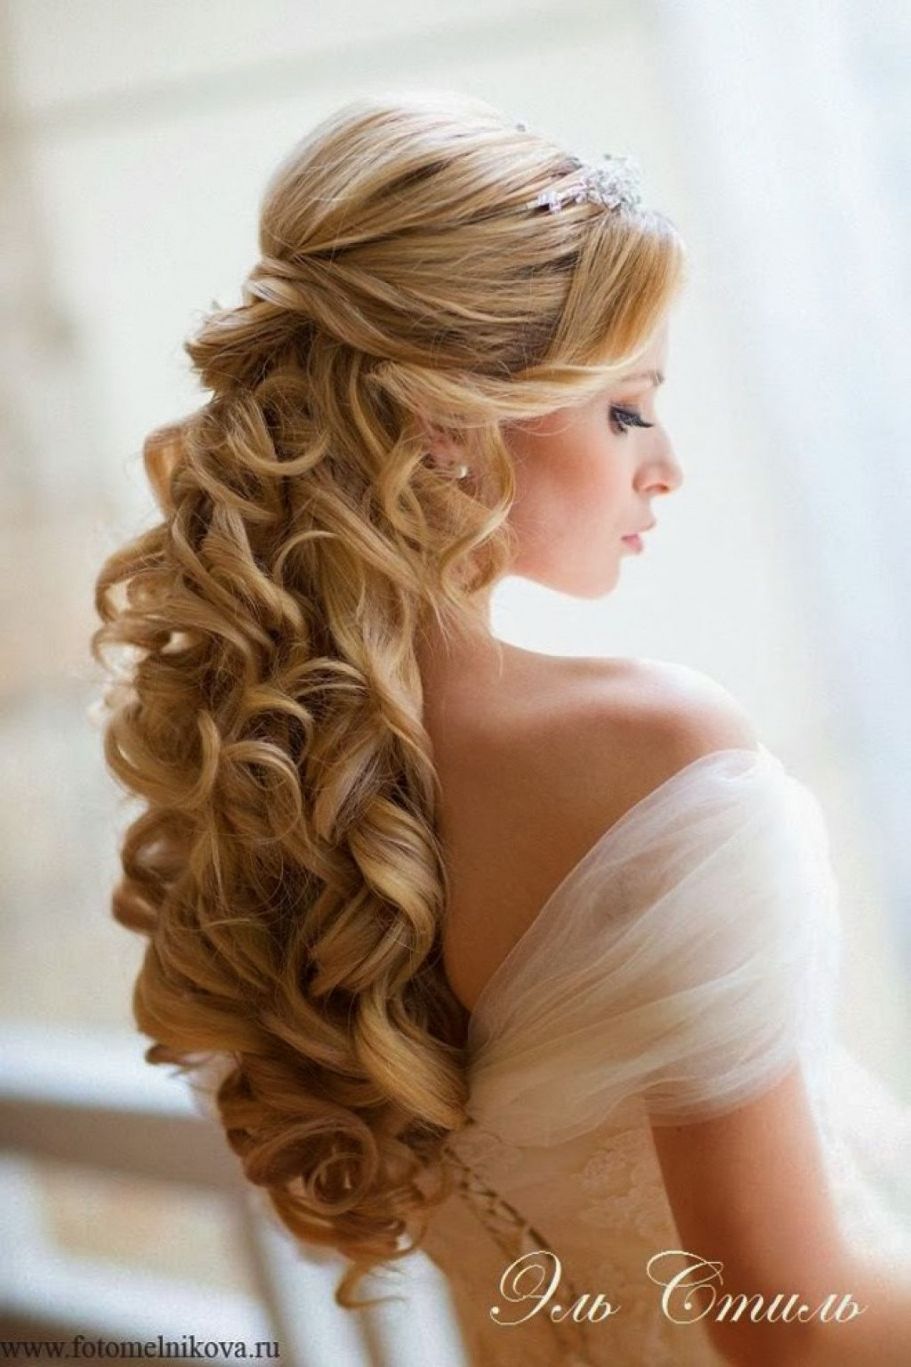 Well Known Long Hair Down Wedding Hairstyles Inside Inspirational Wedding Hairstyles Long Hair Down 97 Inspiration With (View 12 of 15)